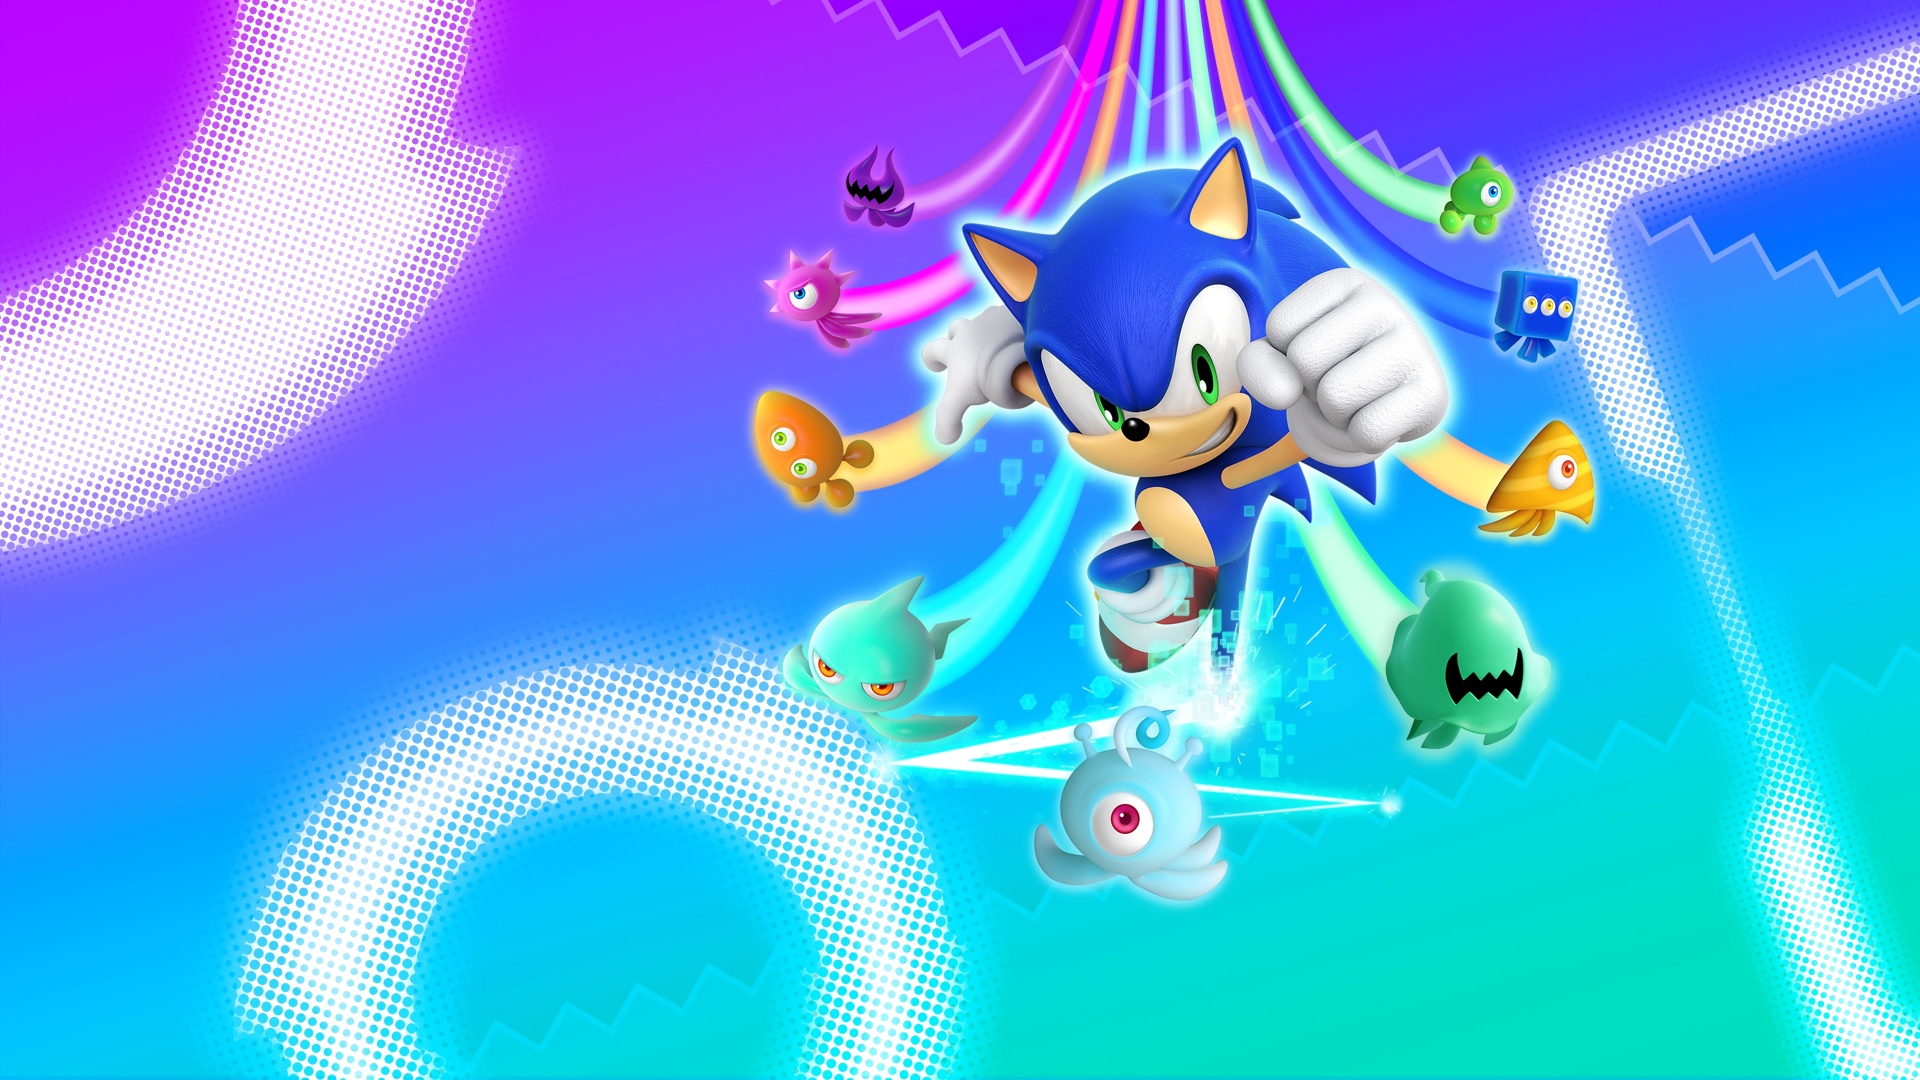 Sonic Colors: Ultimate 4K Wallpaper, 2021 Games, Nintendo Switch, Wii